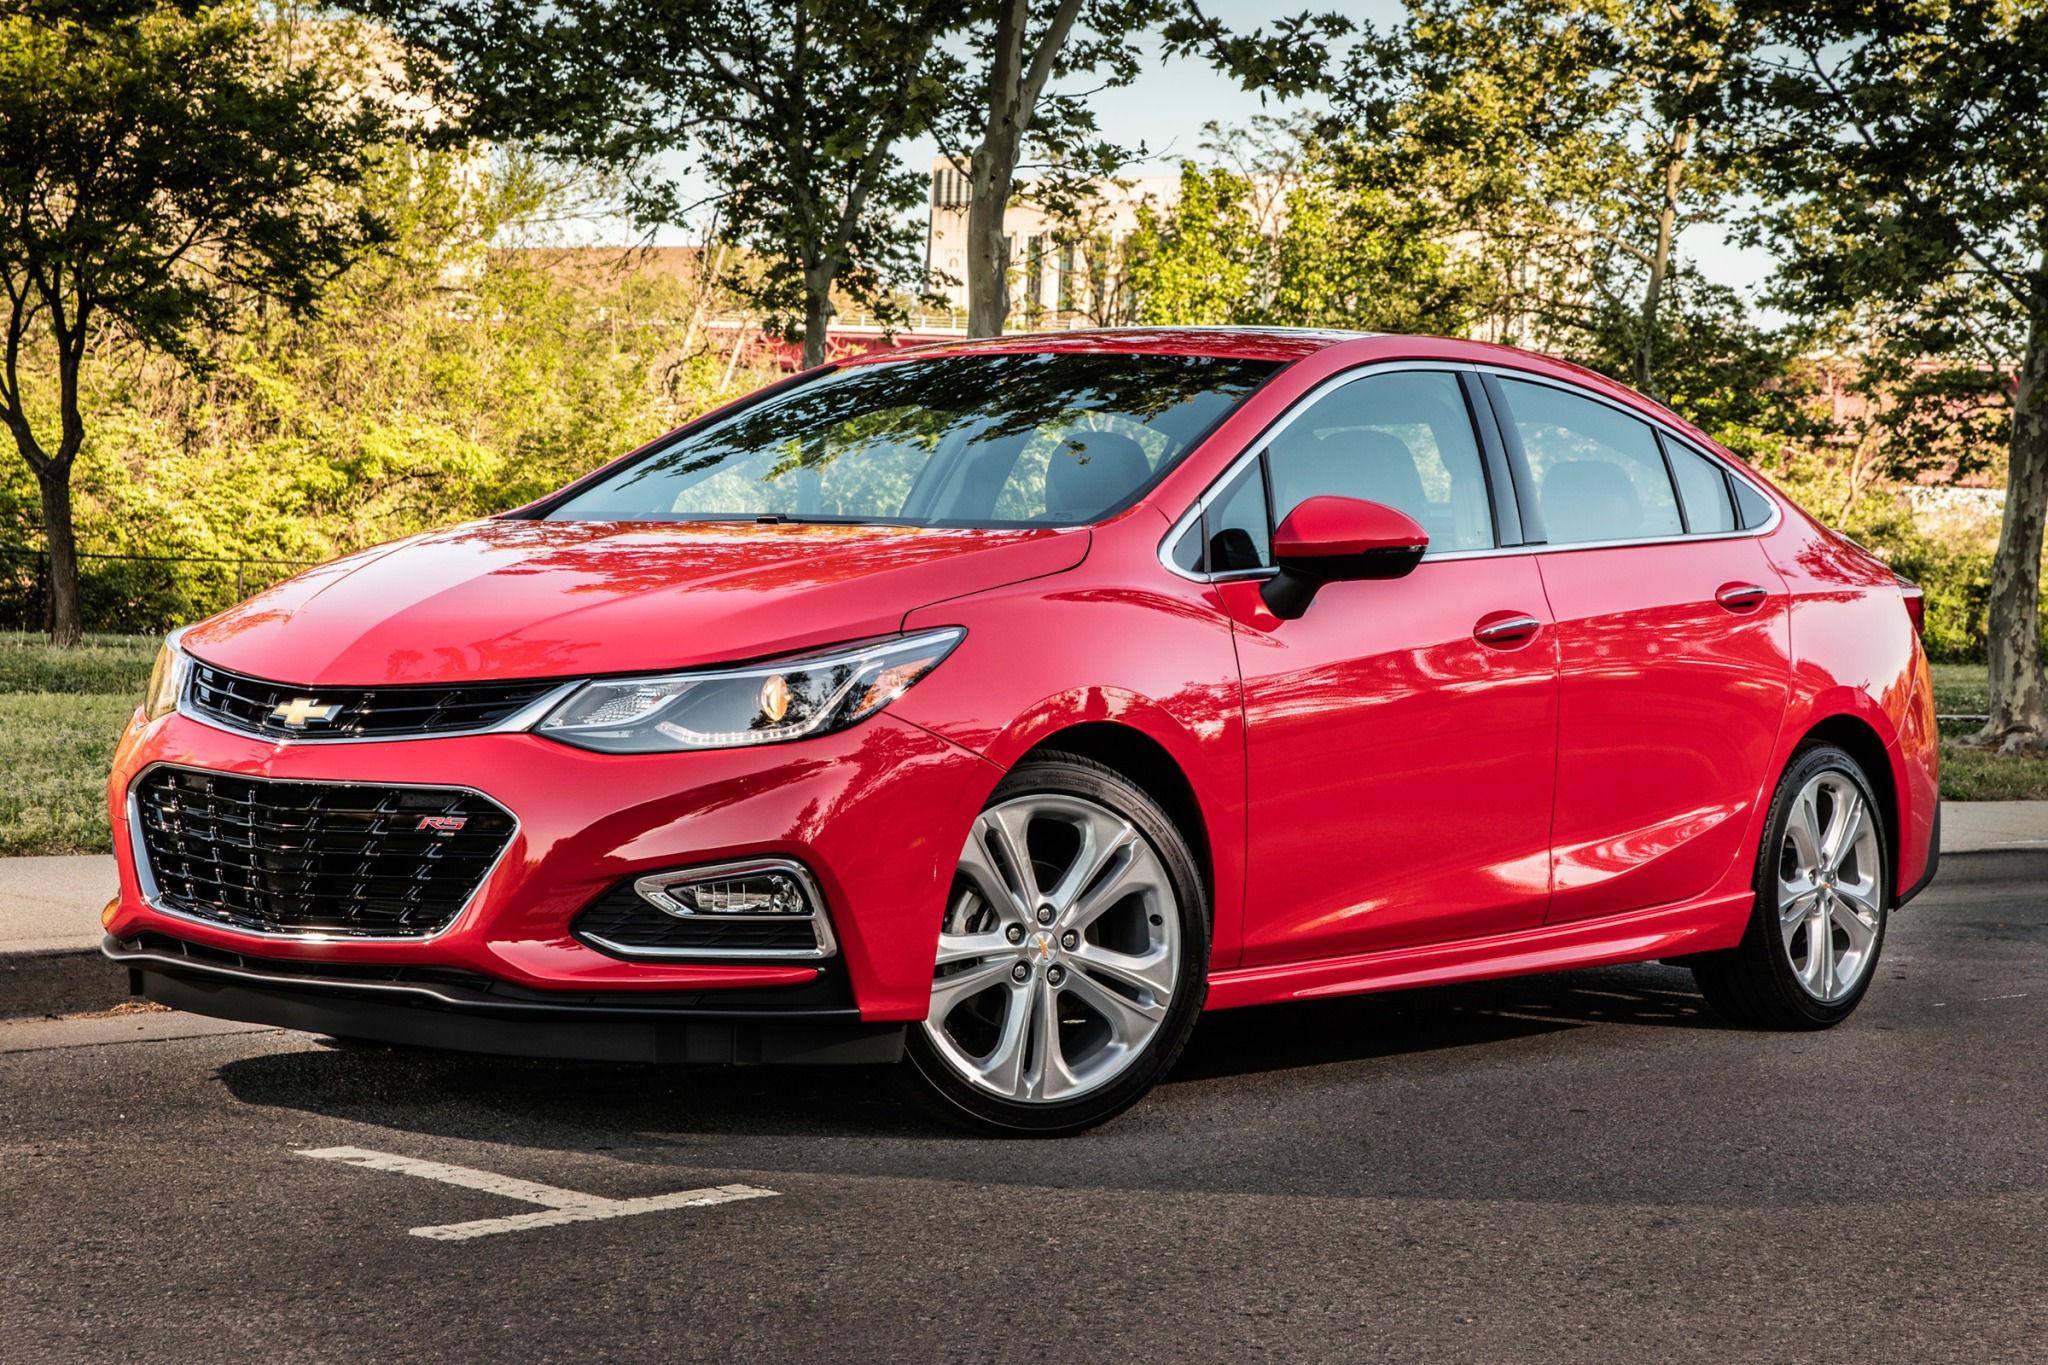 2017 Chevrolet Cruze LS Manual VIN Number Search